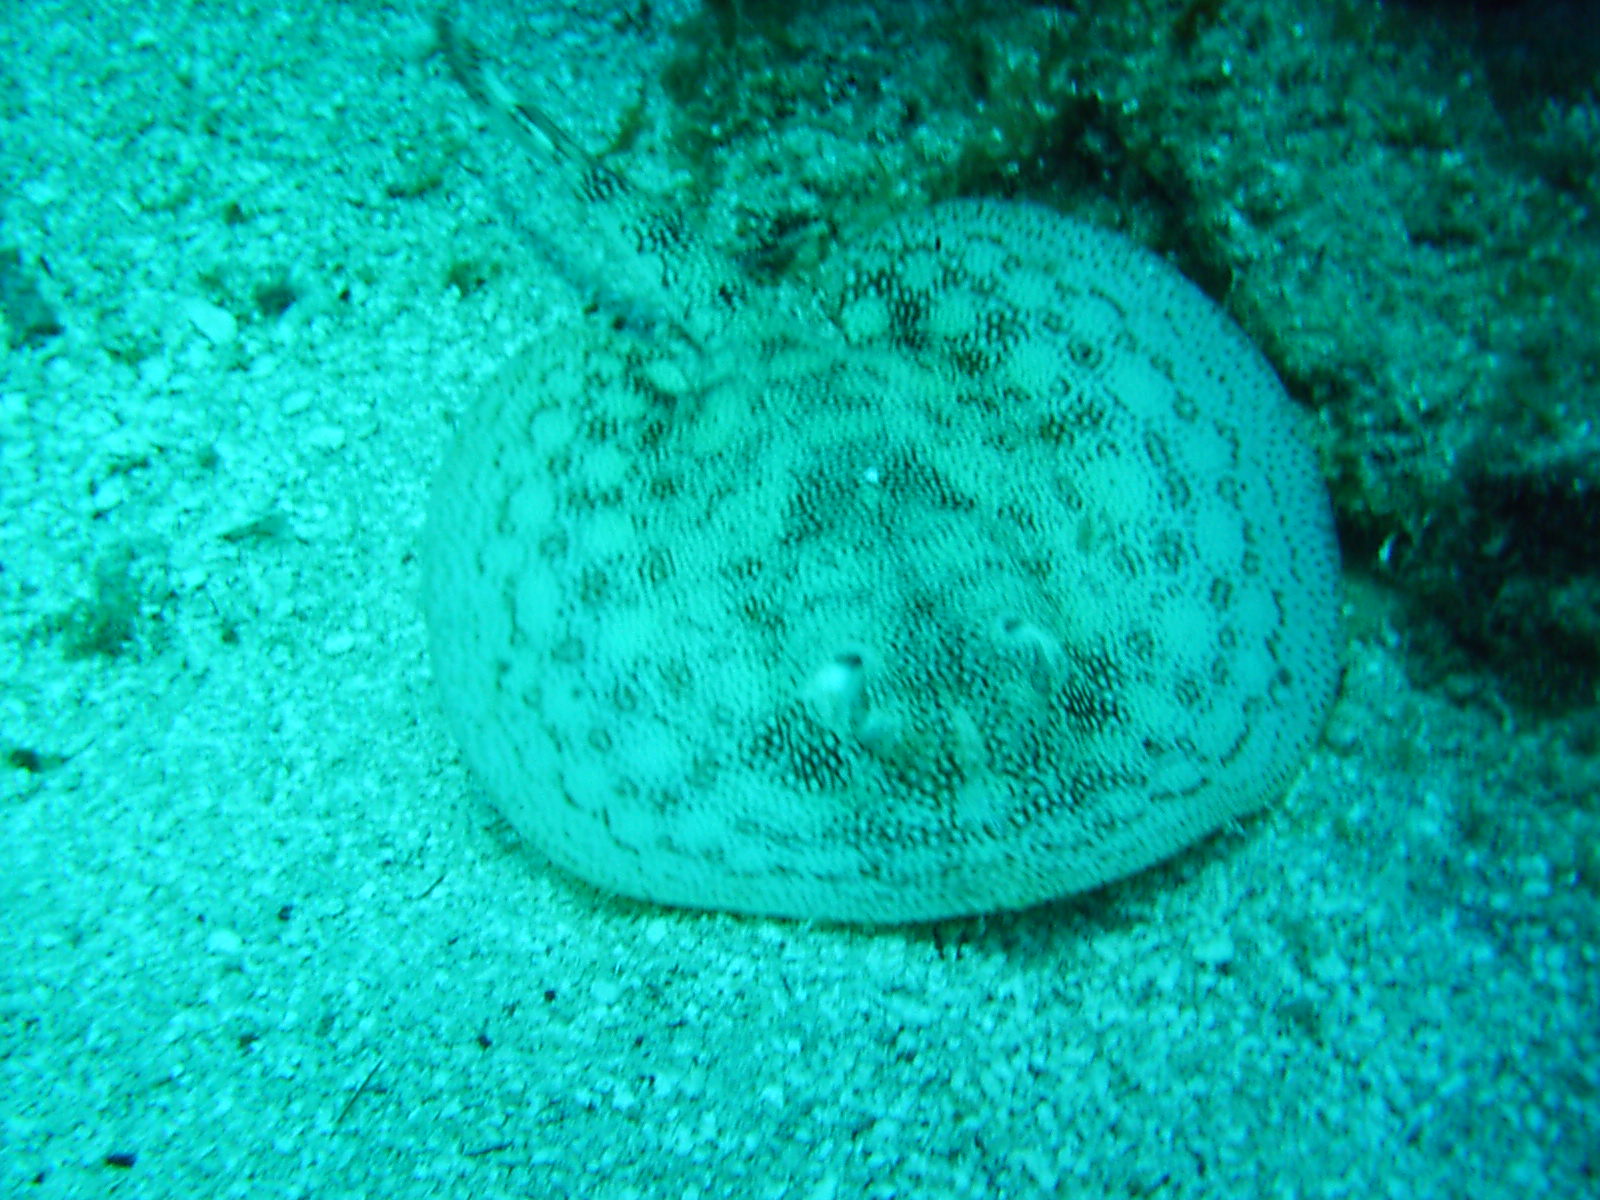 Jamaica - Small spotted stingray